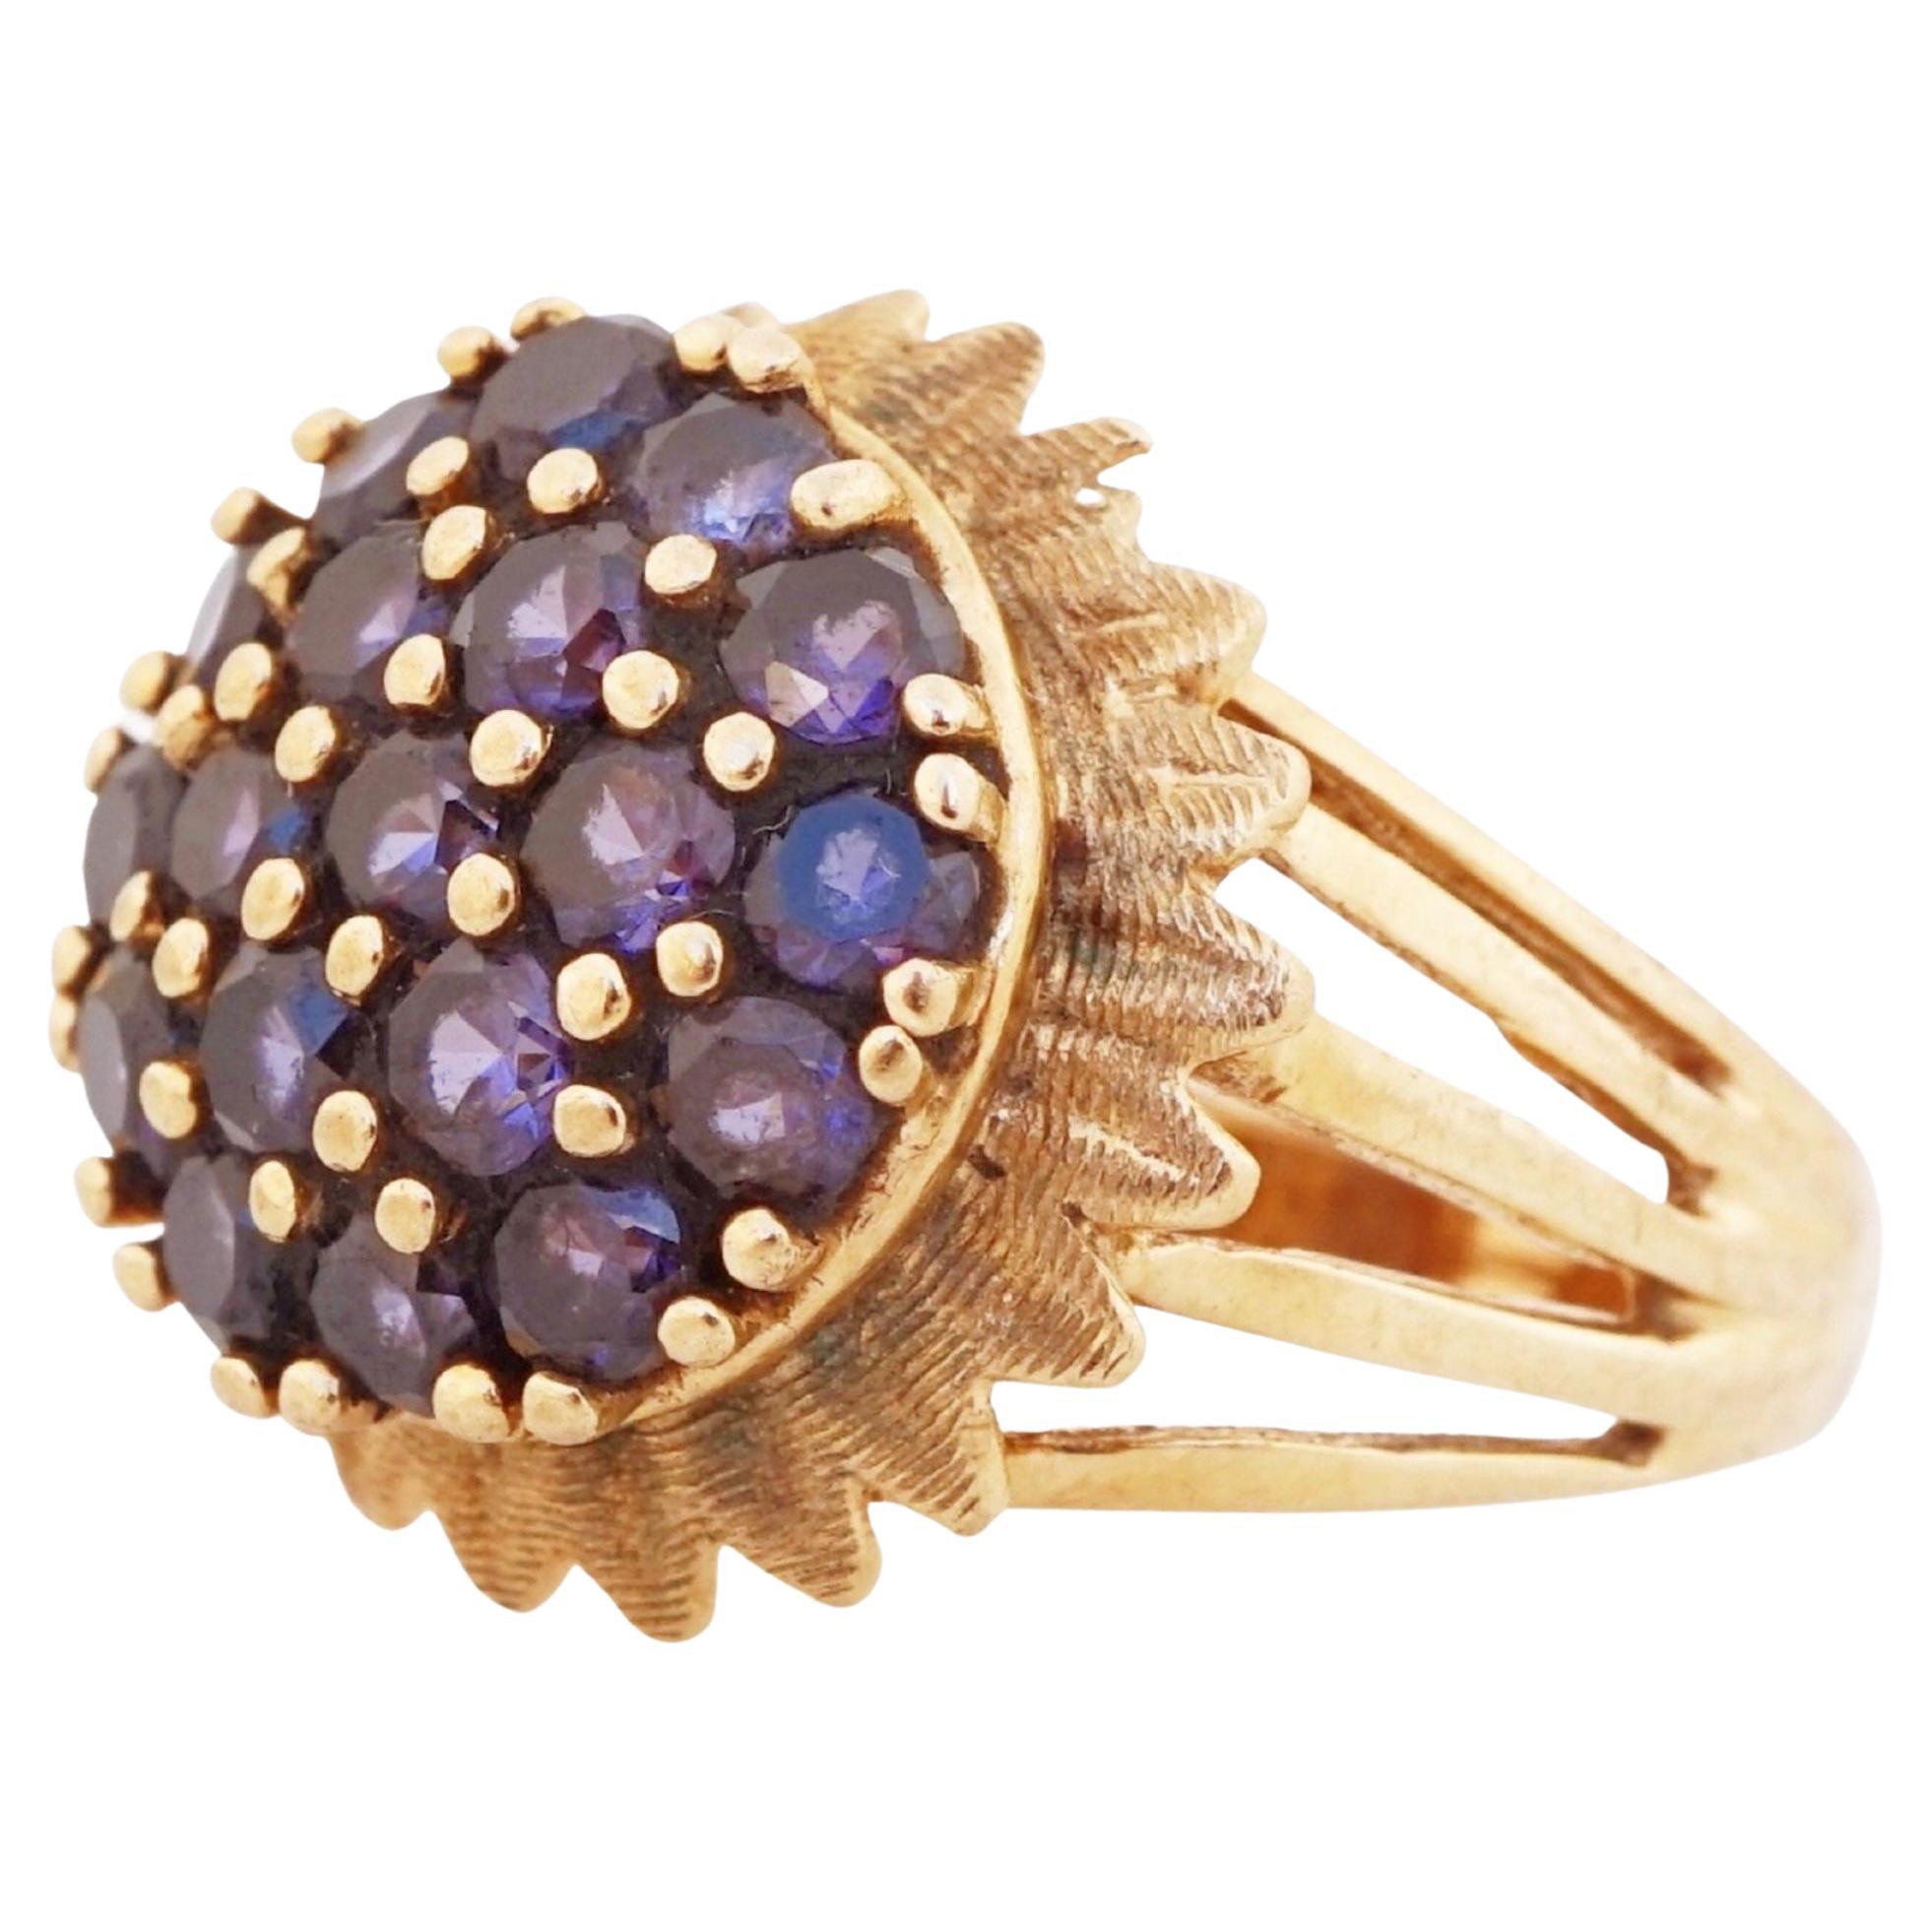 10k Gold Floral Ring with Sapphire Gemstones, 1970s